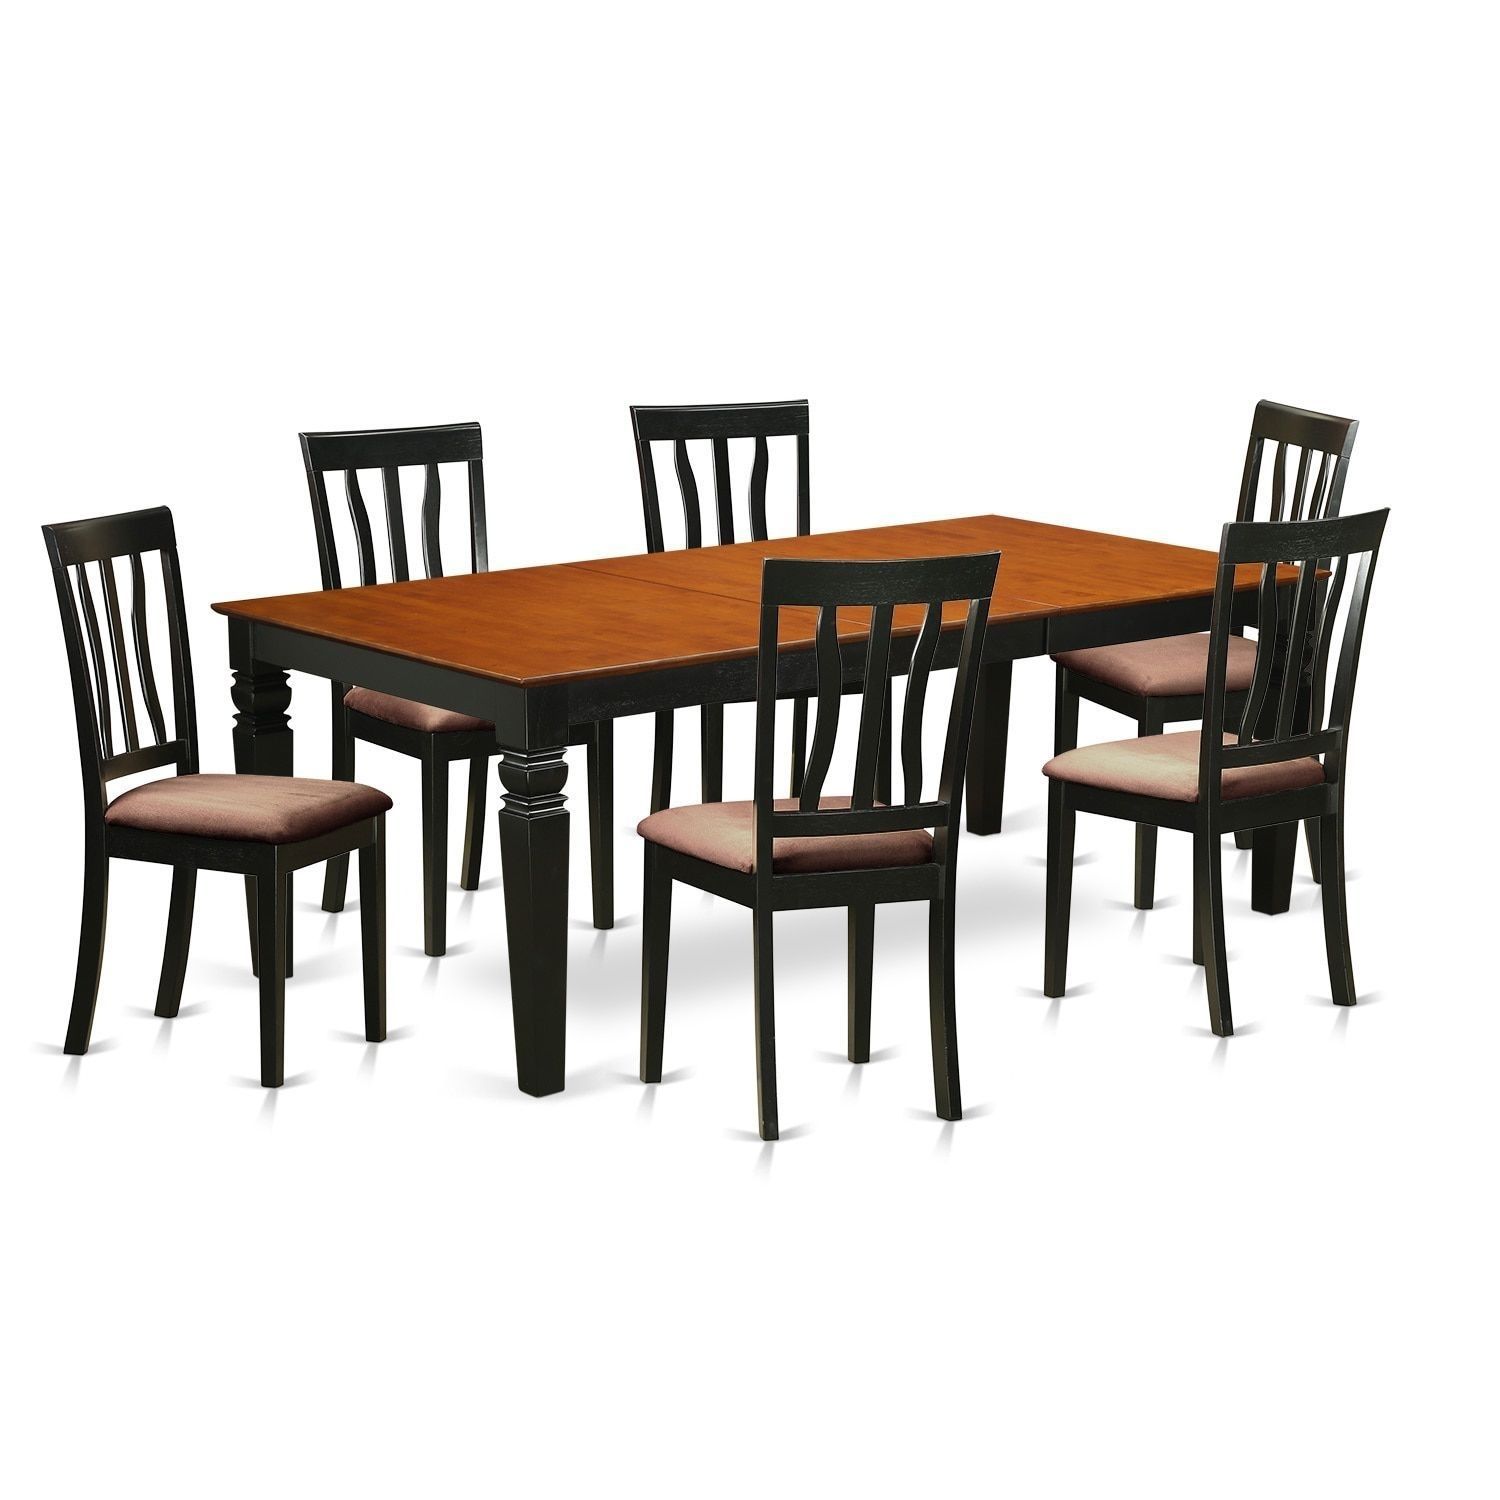 Lgan7 Bch 7 Piece Kitchen Table Set With One Logan Dining Table And Inside Current Logan 6 Piece Dining Sets (View 6 of 20)